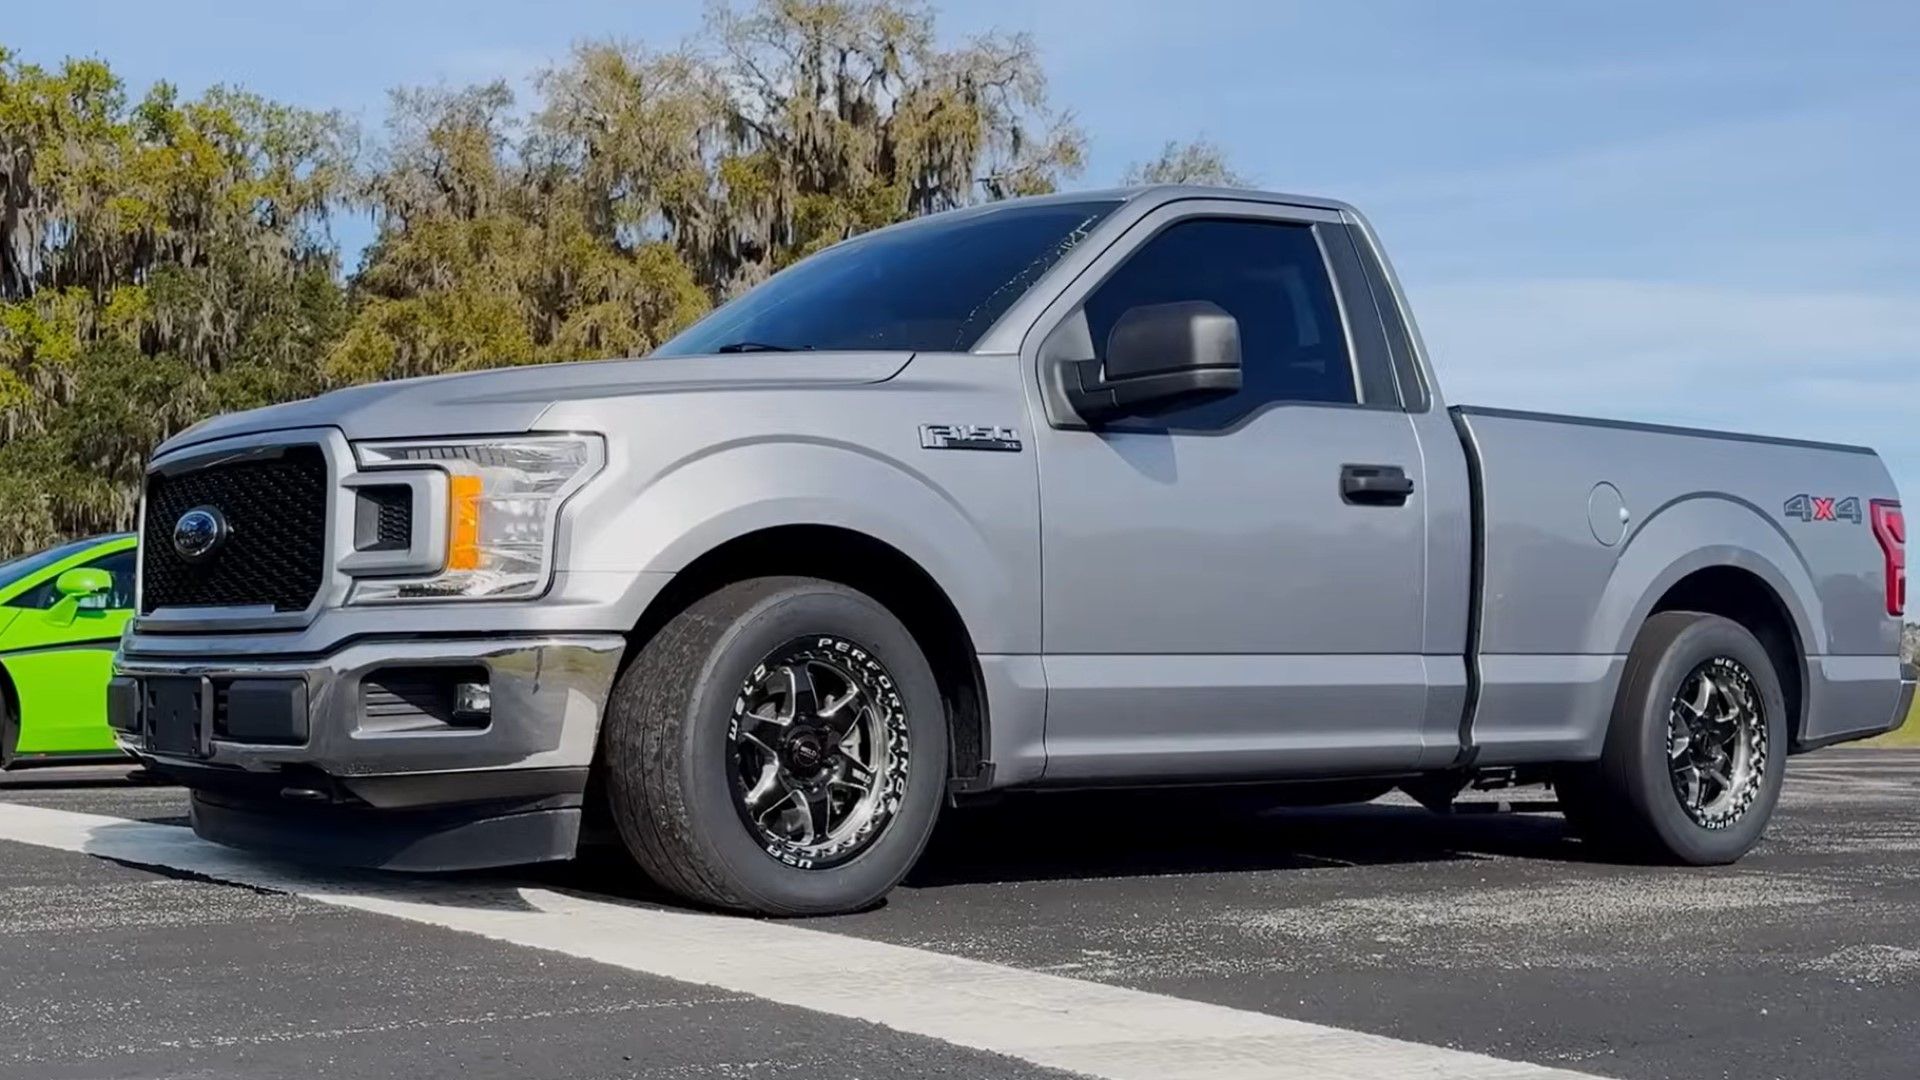 That Racing Channel's Ford F-150 Work Truck, front quarter view